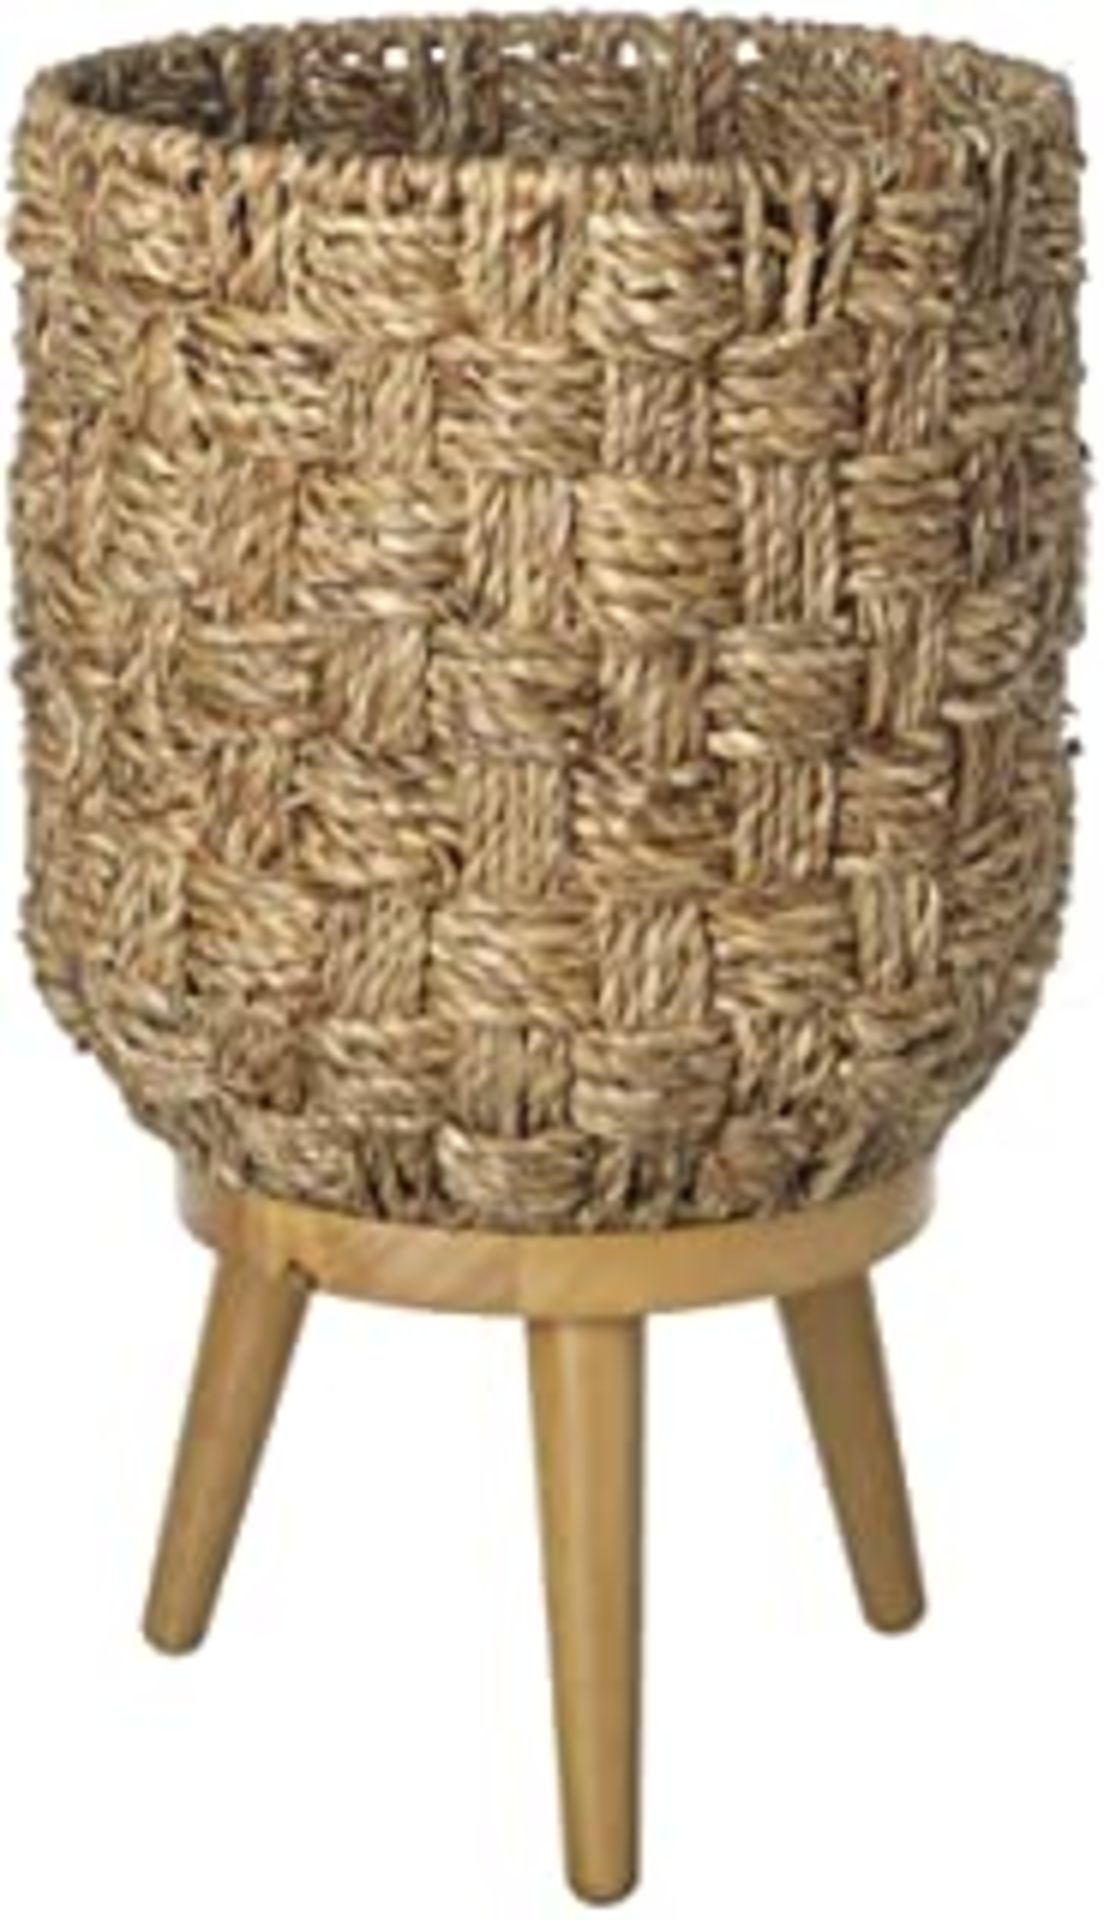 Peru Planter Natural seagrass 300x515mmh Brand New Parlane Accessories We take our product seriously - Image 2 of 2